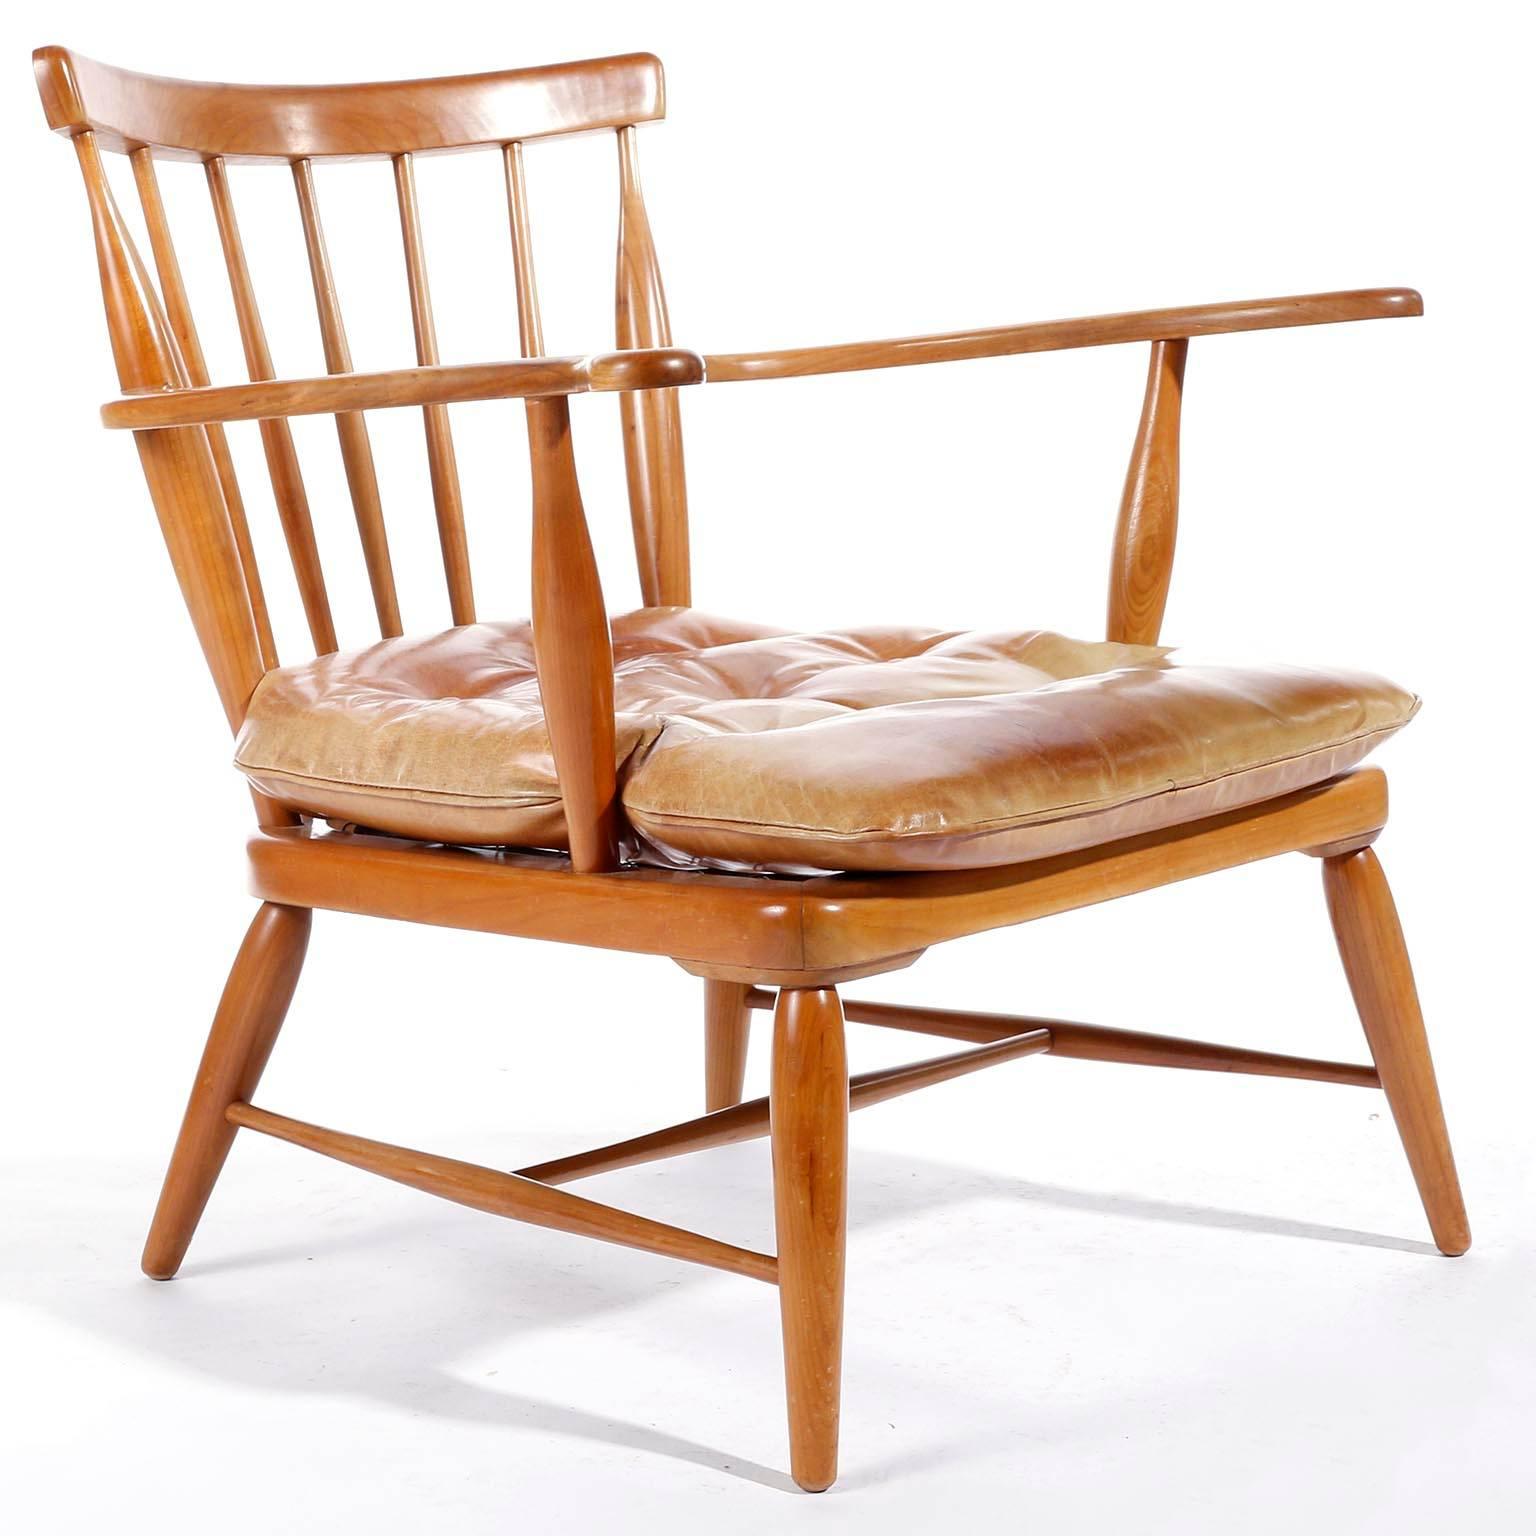 Mid-Century Modern, Arm Chair in Wood and Patinated Cognac Leather, 1950 For Sale 3